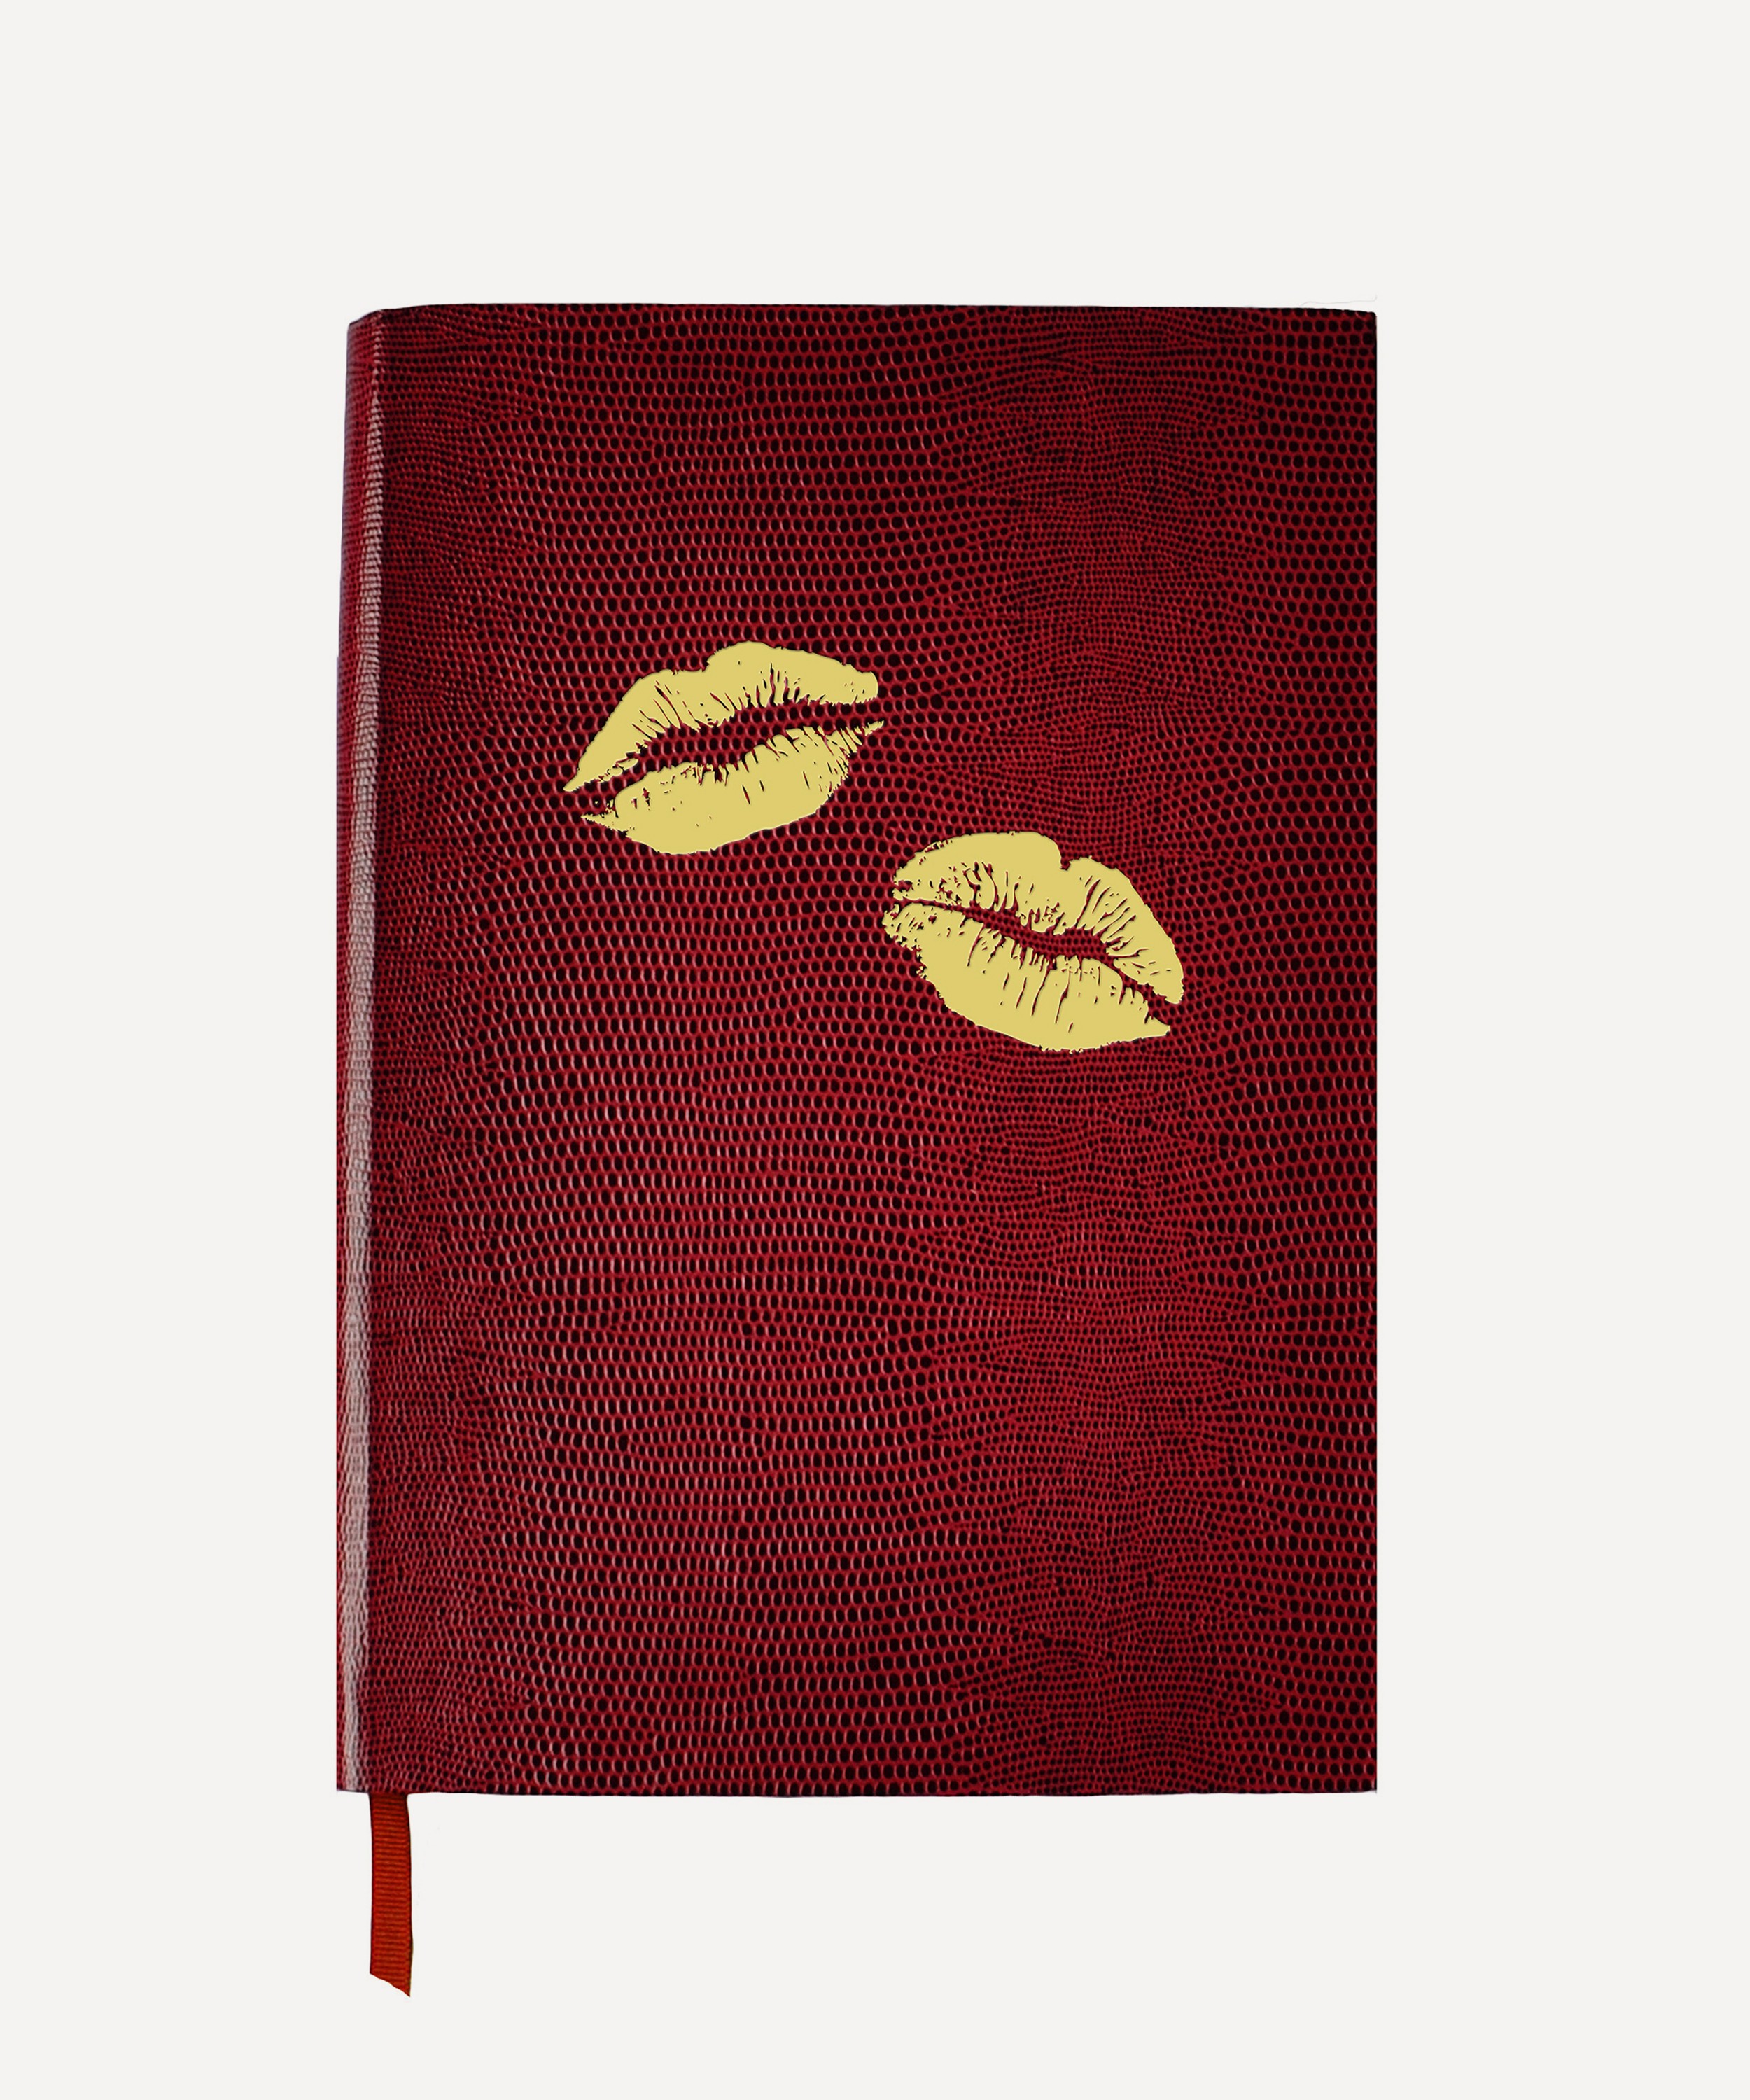 Sloane Stationery - Double Lips A5 Notebook